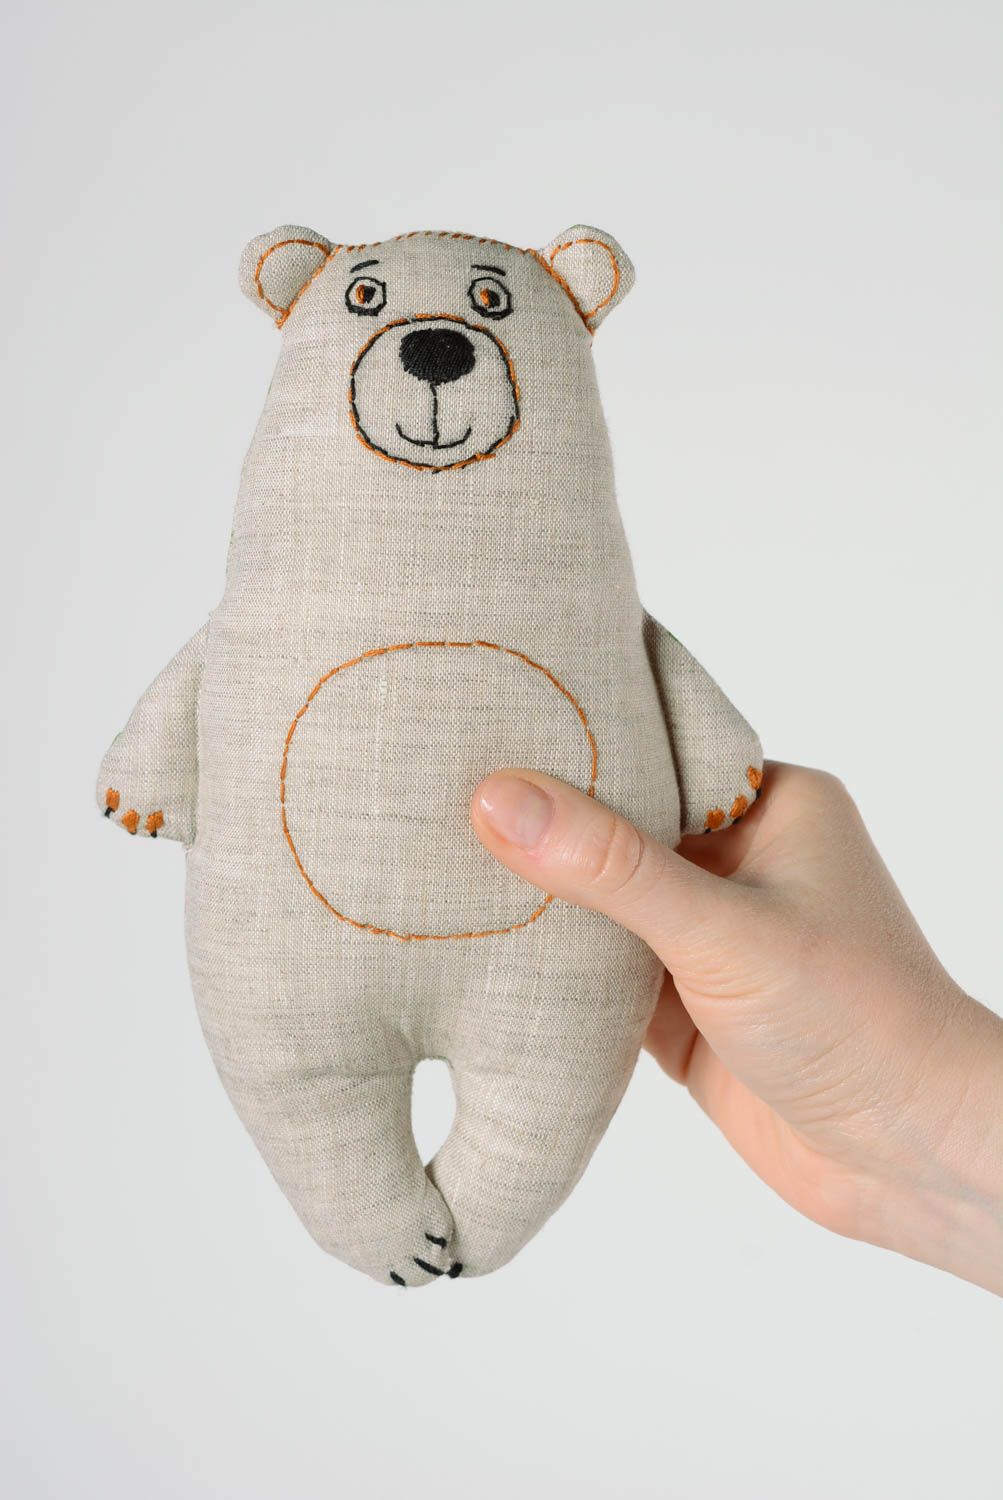 Handmade soft toy bear sewn of one colored and patterned linen with embroidery photo 3